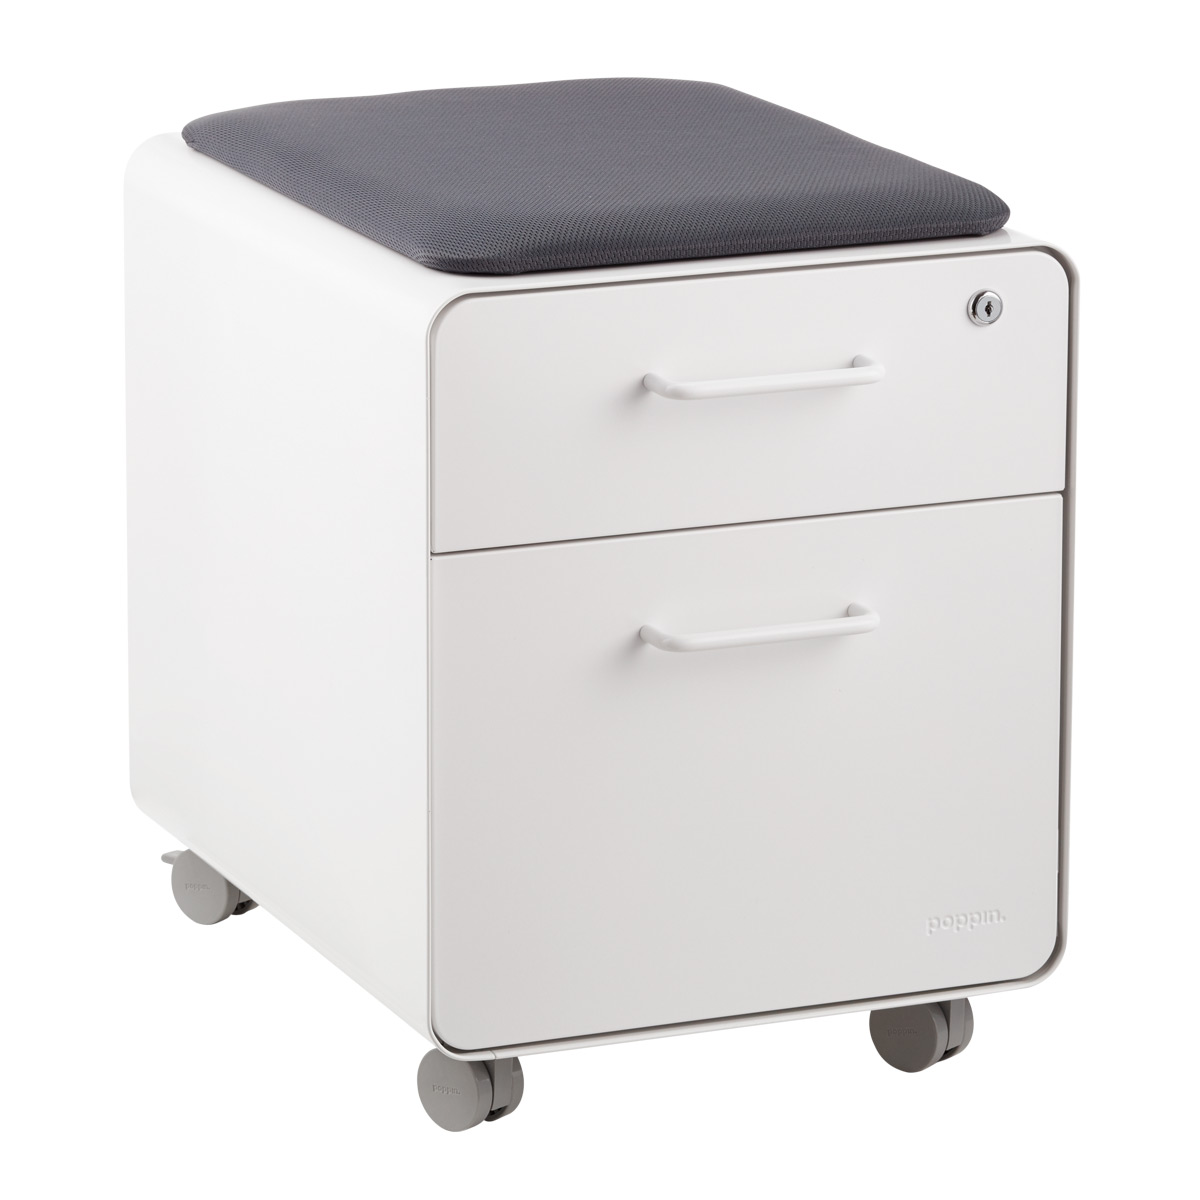 https://www.containerstore.com/catalogimages/334421/10073315-poppin-mini-2-drawer-stow-l.jpg